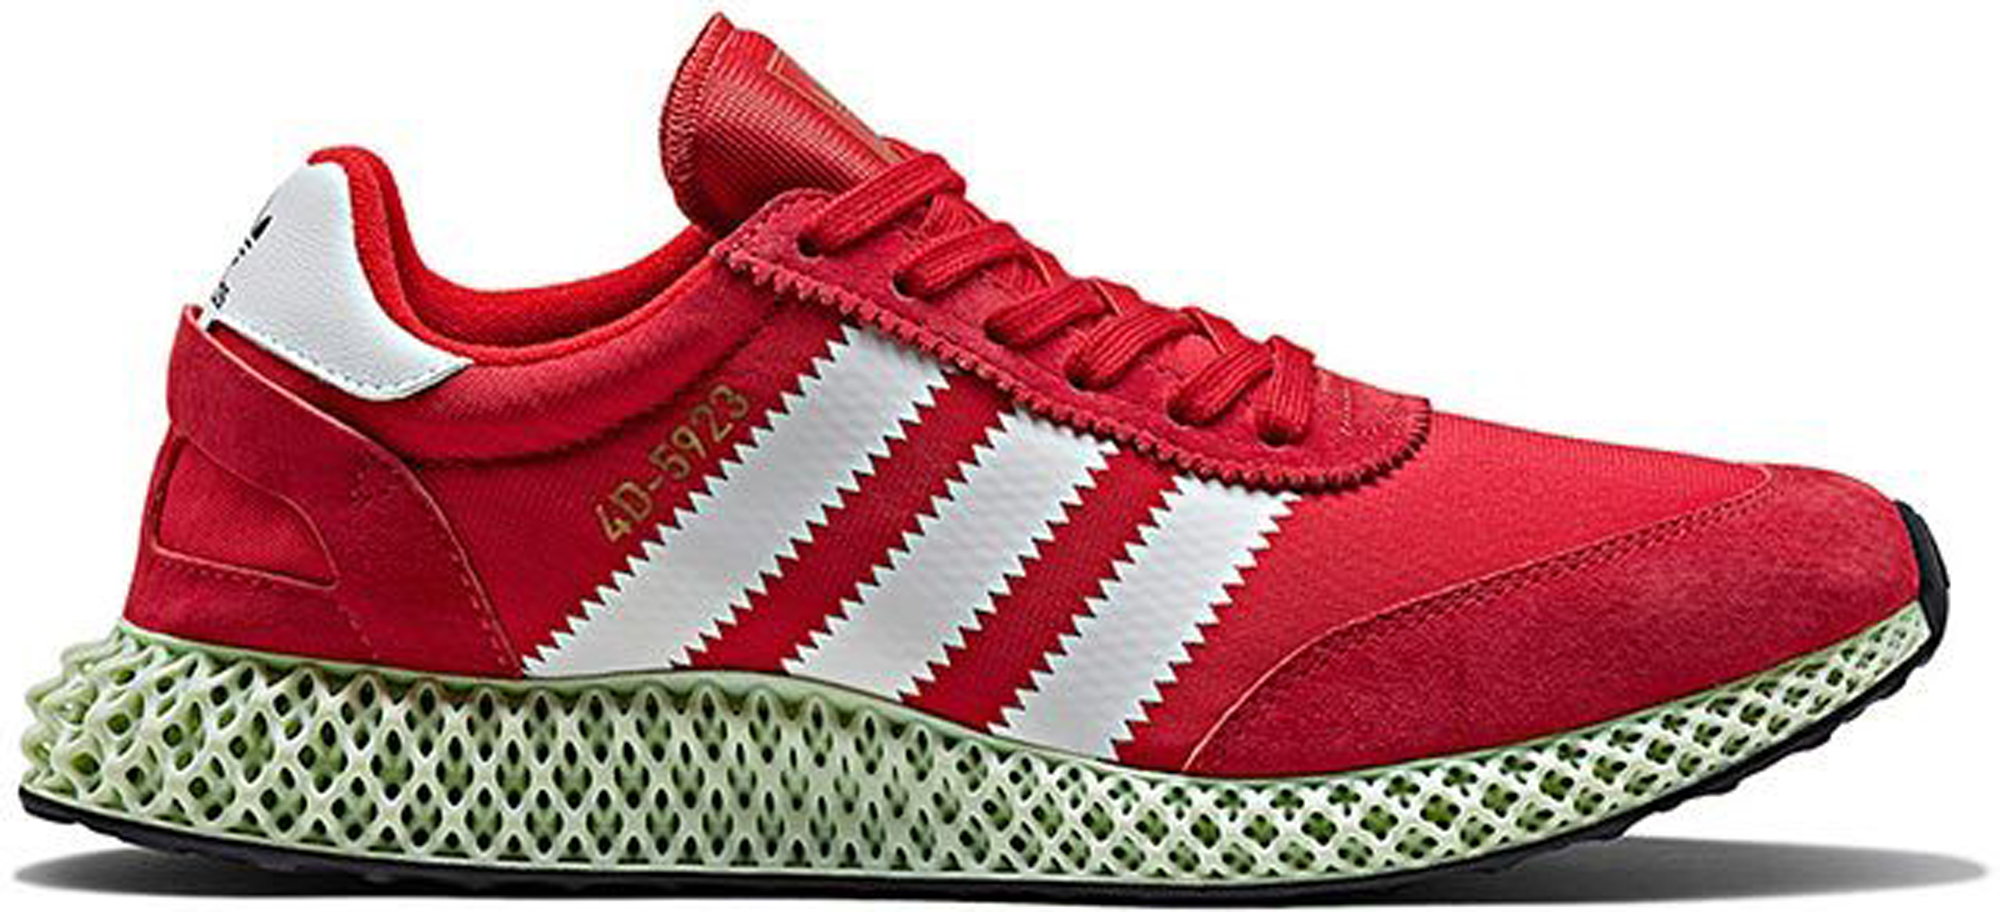 adidas 4D-5923 Never Made Pack - Sneakers